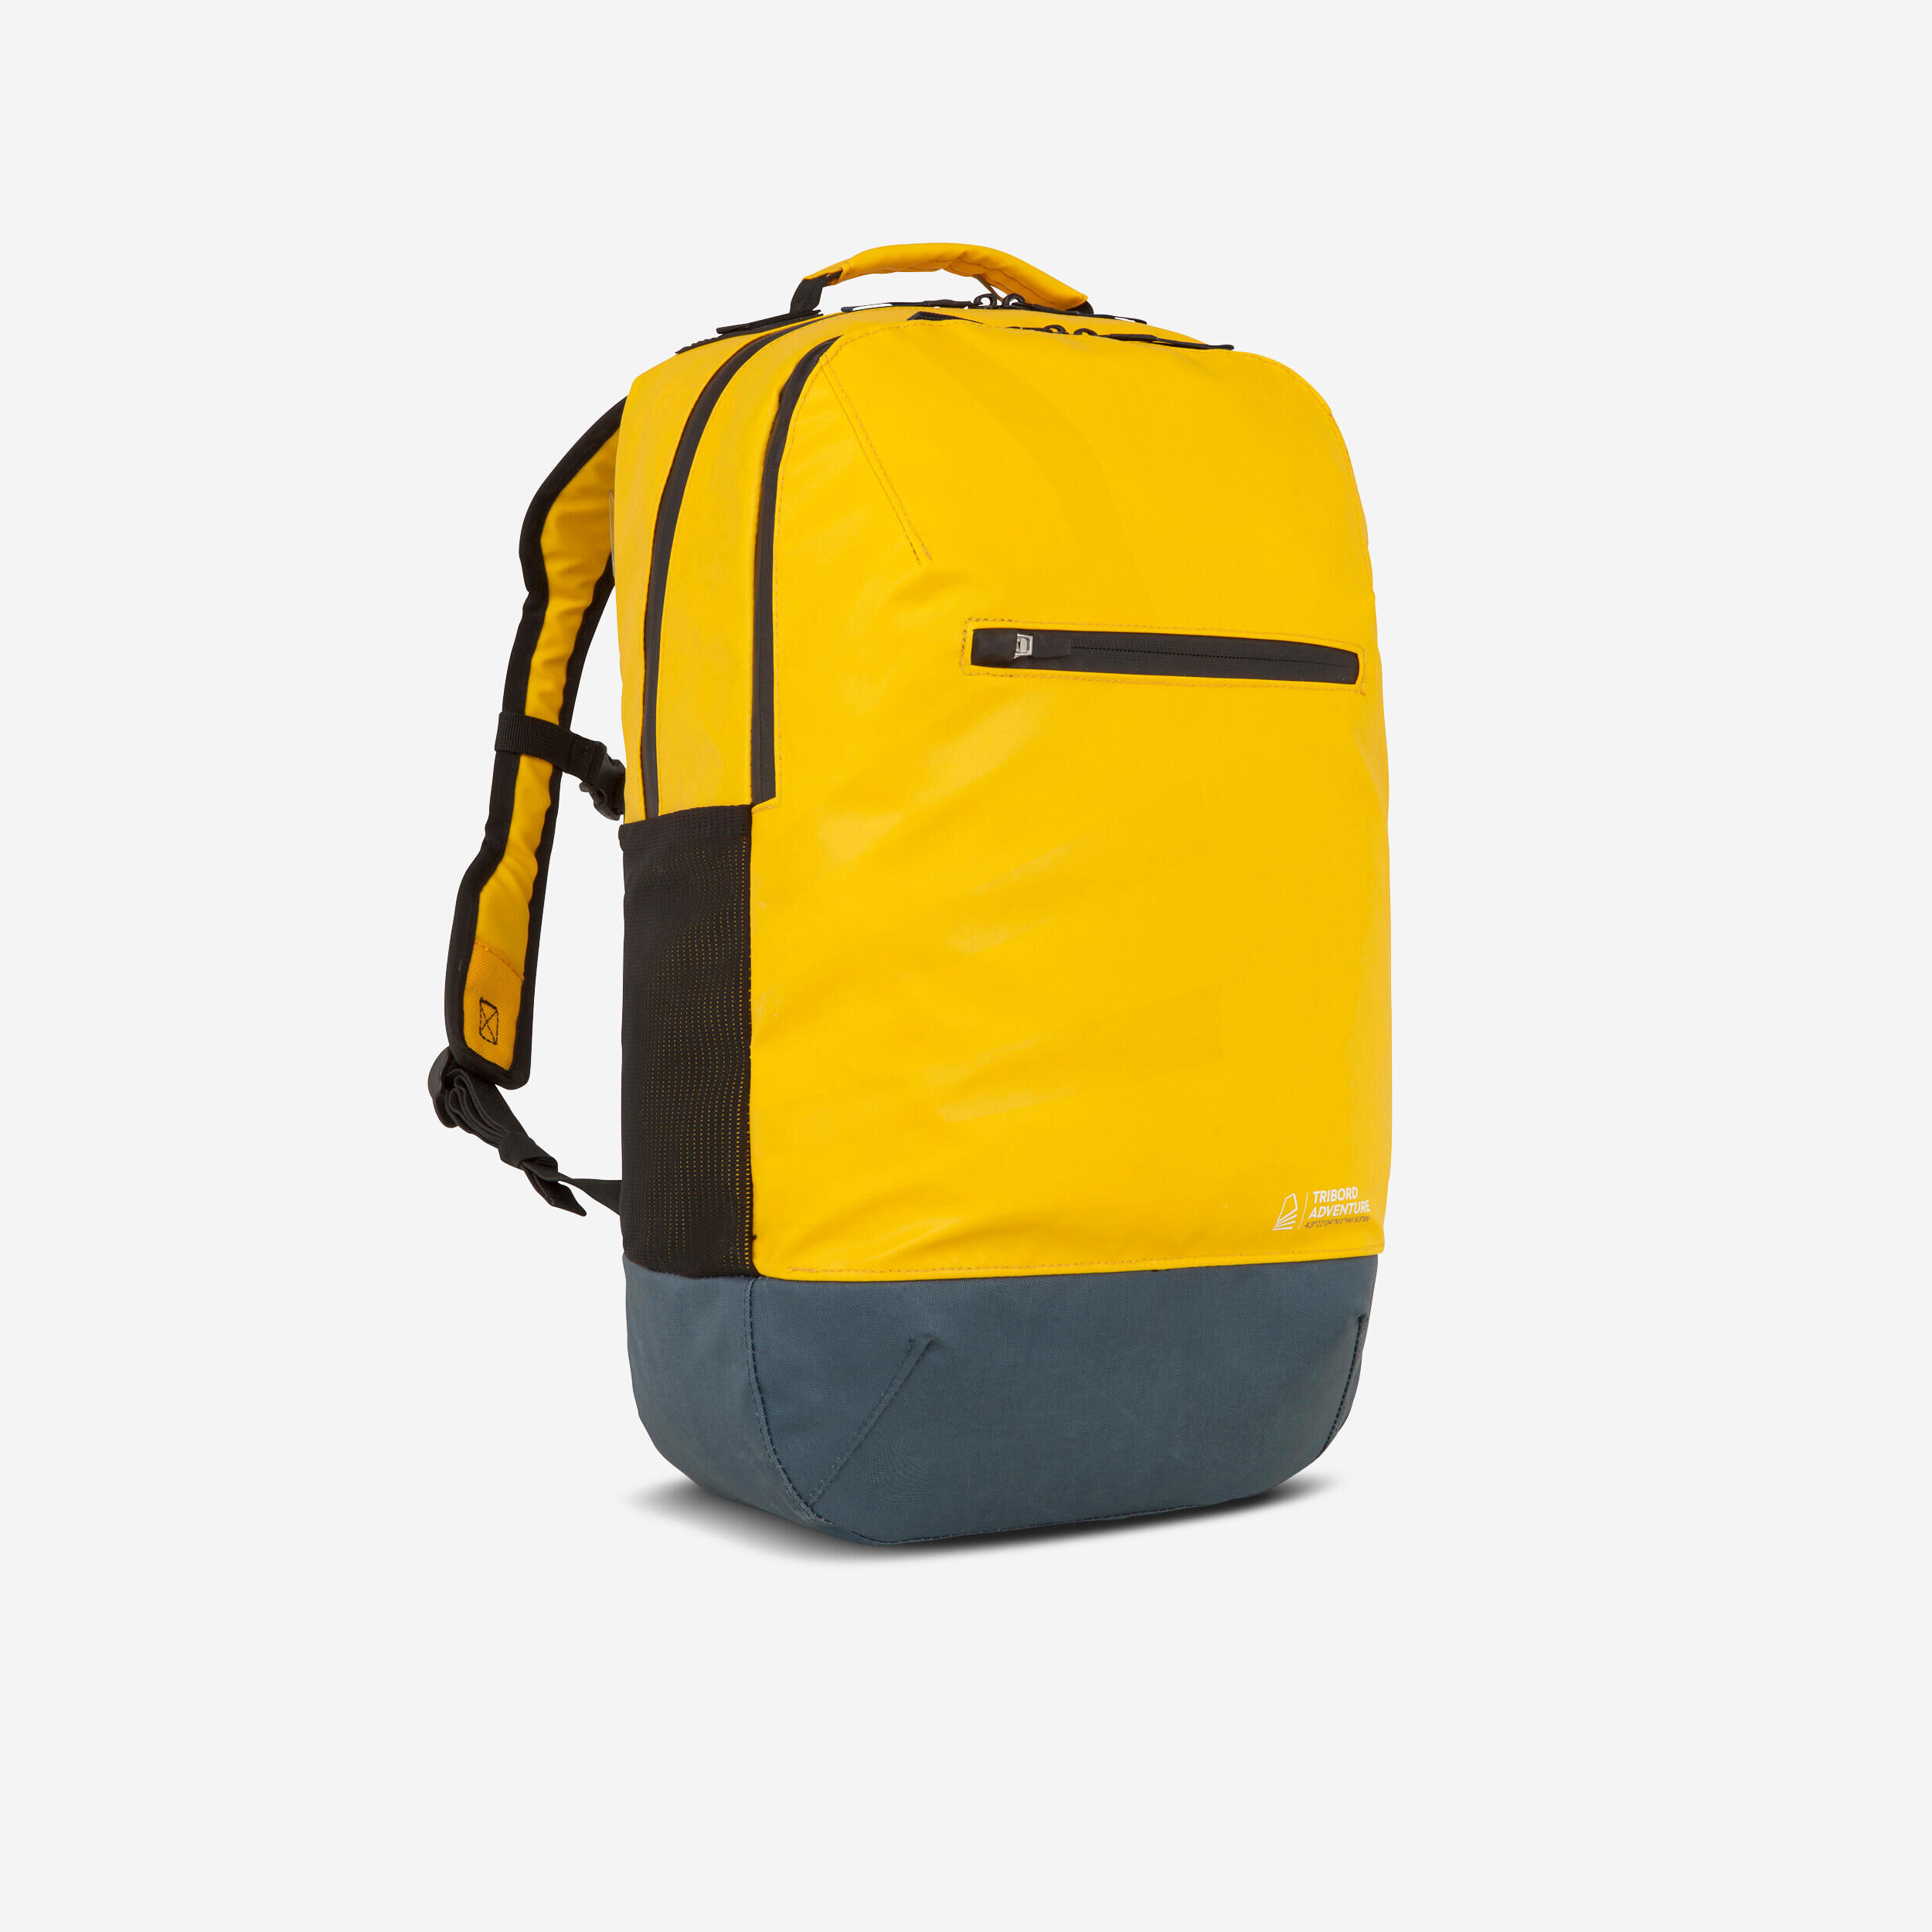 TRIBORD Waterproof backpack 25 litres - Yellow